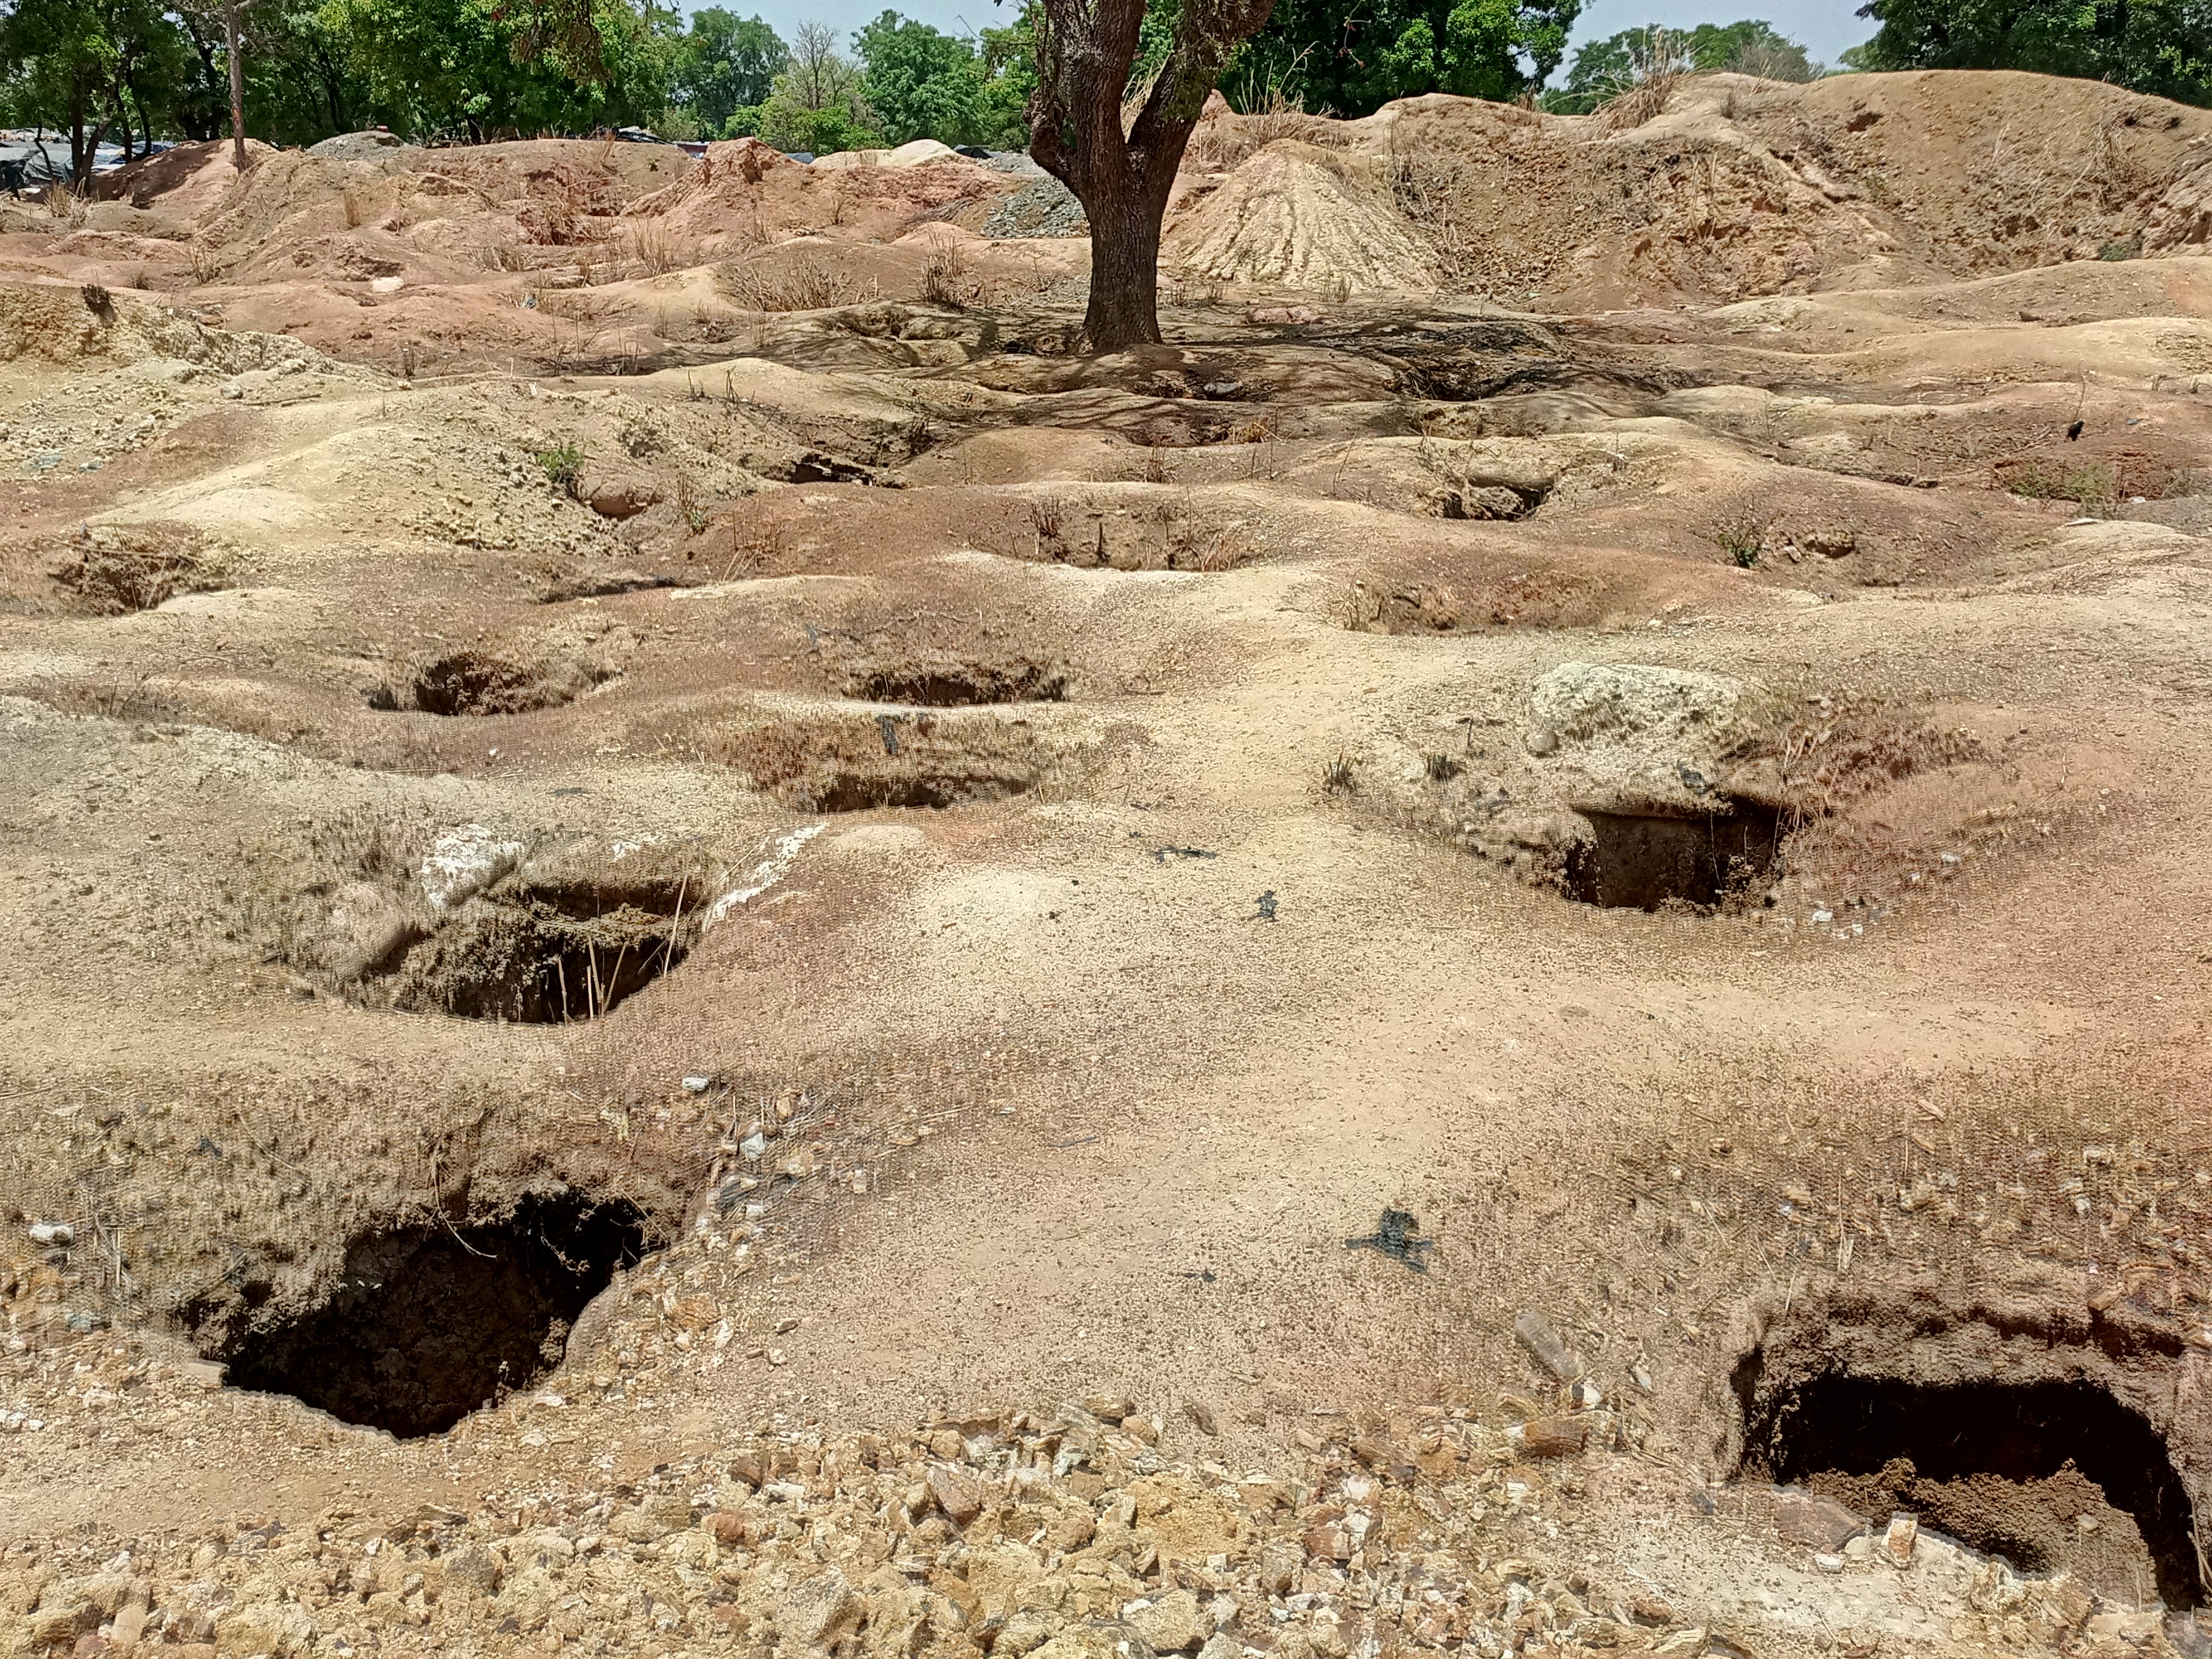 Artisanal gold mining pits are seen at a mining site near Dano